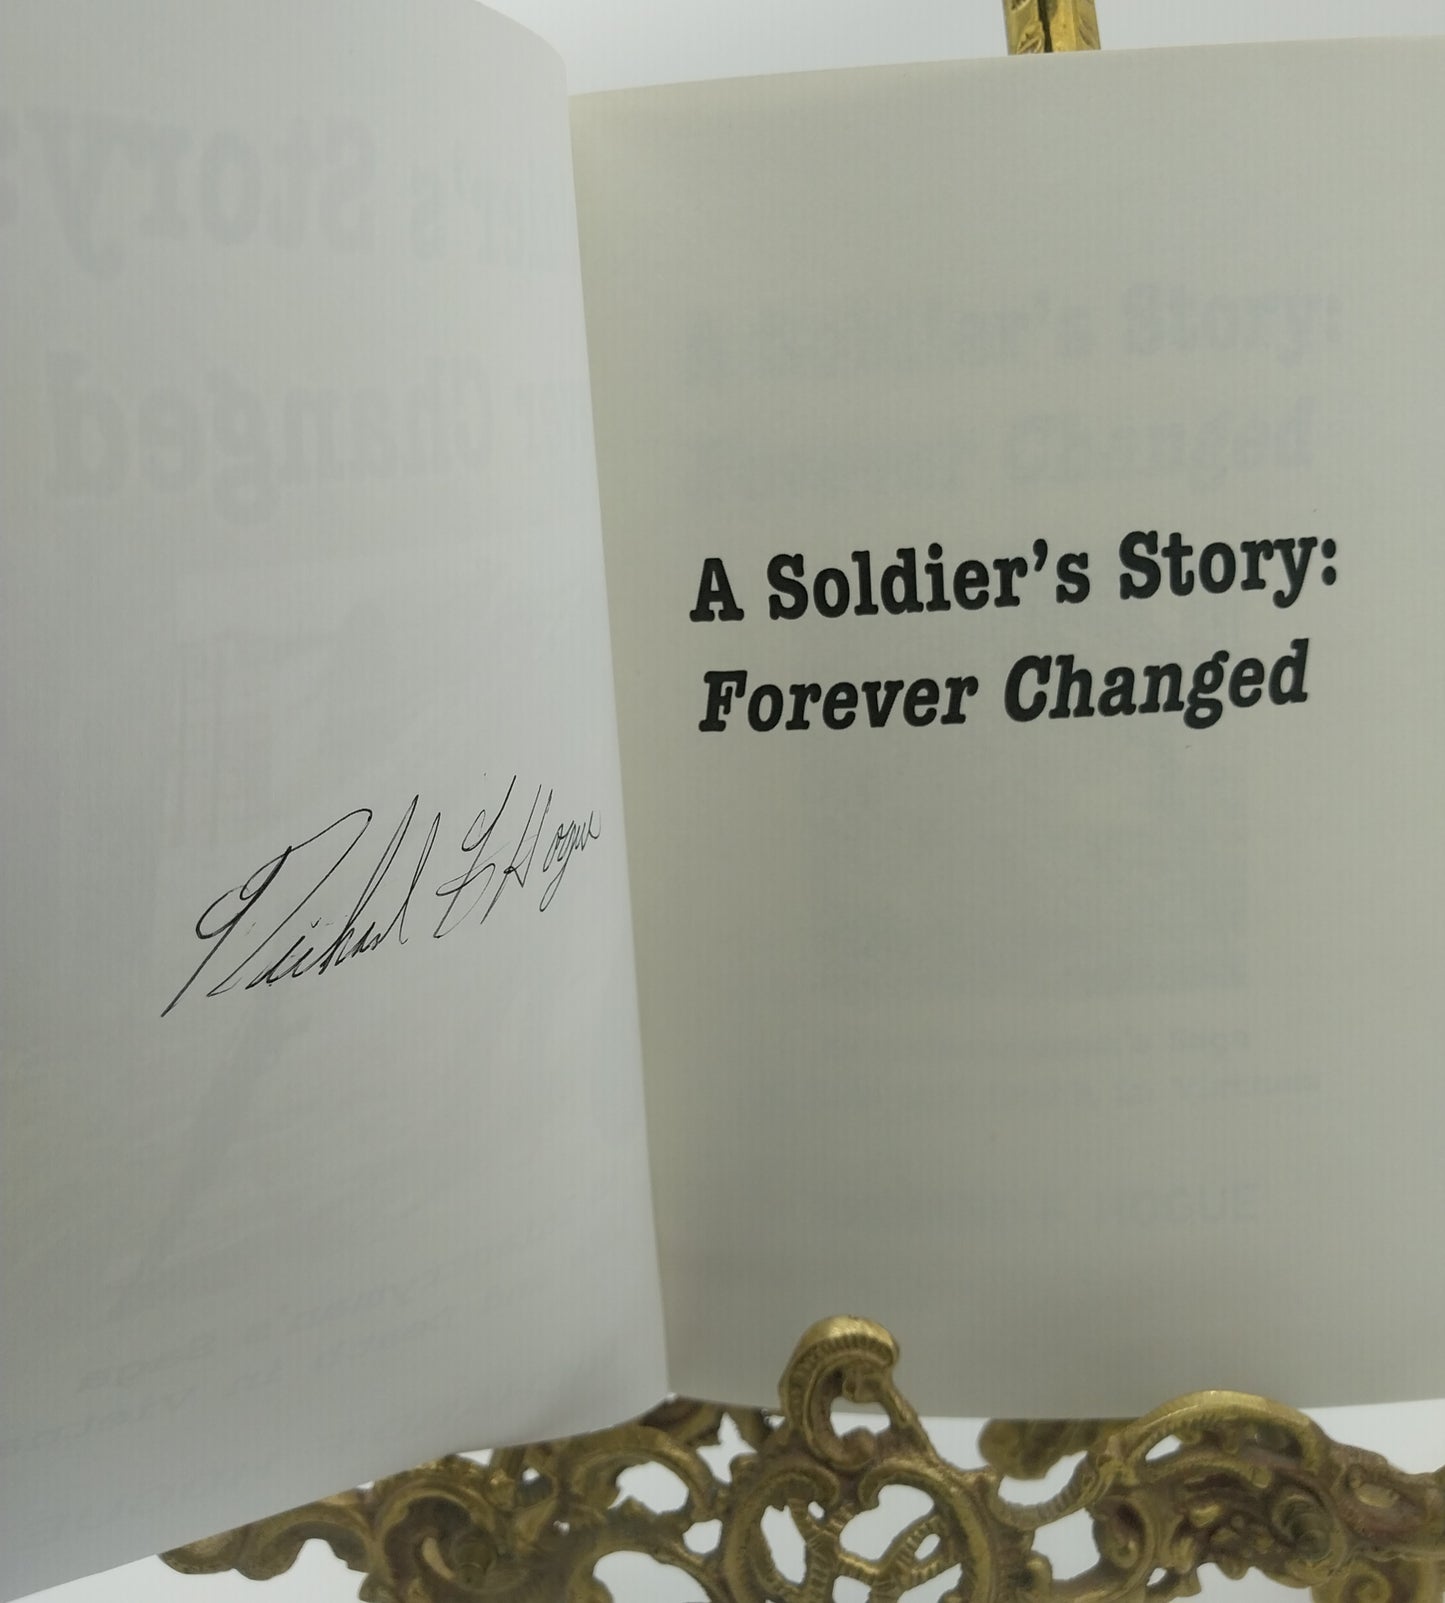 A Soldier's Story: Forever Changes